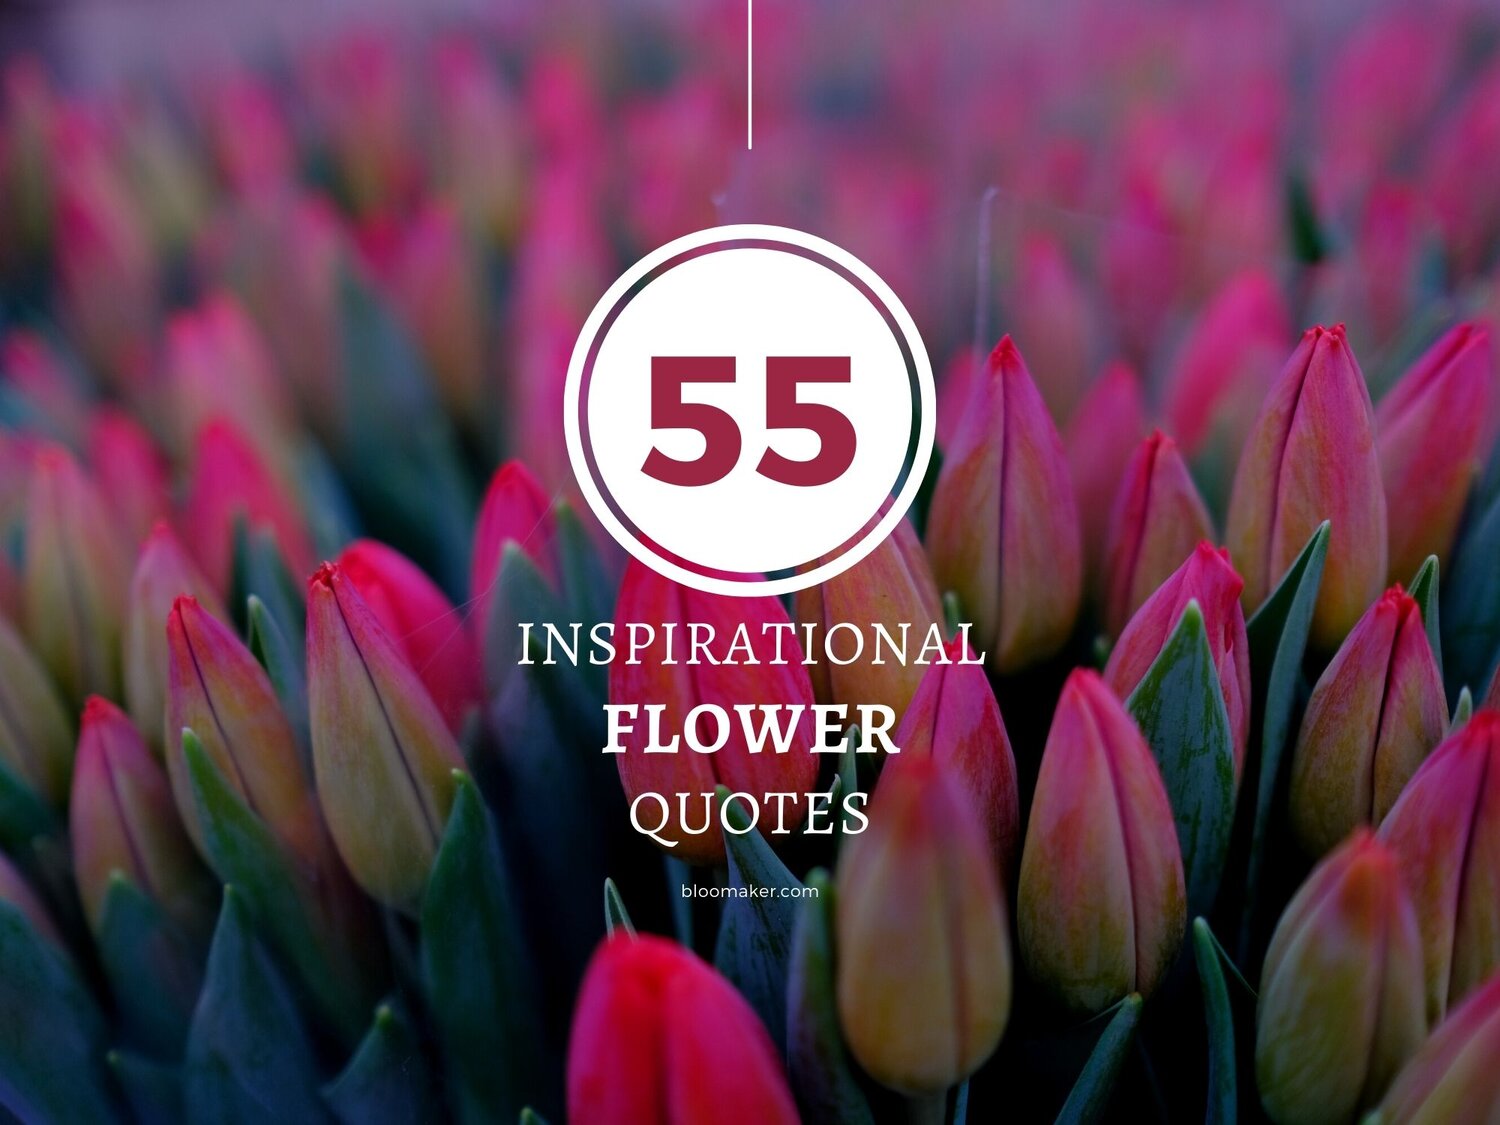 Get inspired with Motivational quotes with flower background - images and wallpapers